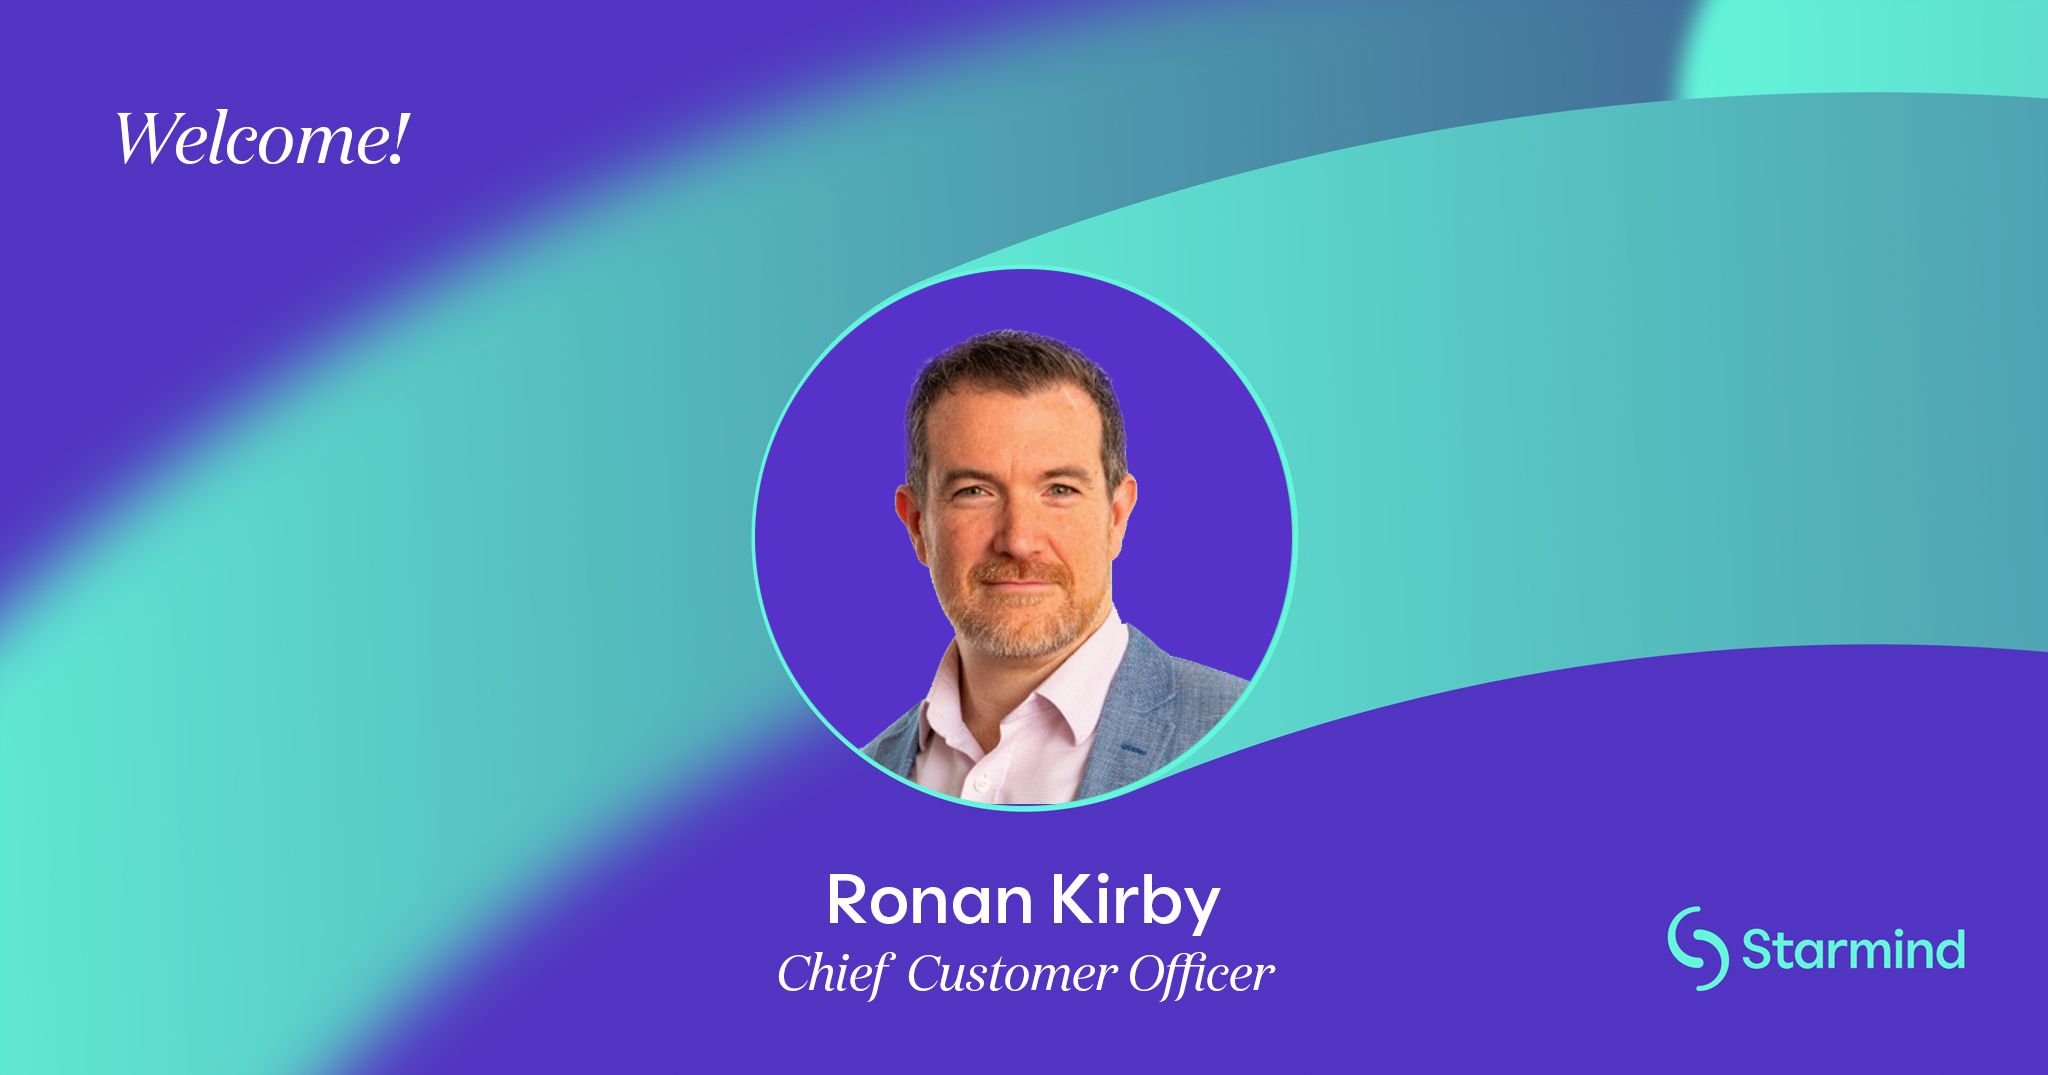 Press release banner image announce Ronan Kirby as Chief Customer Officer at Starmind